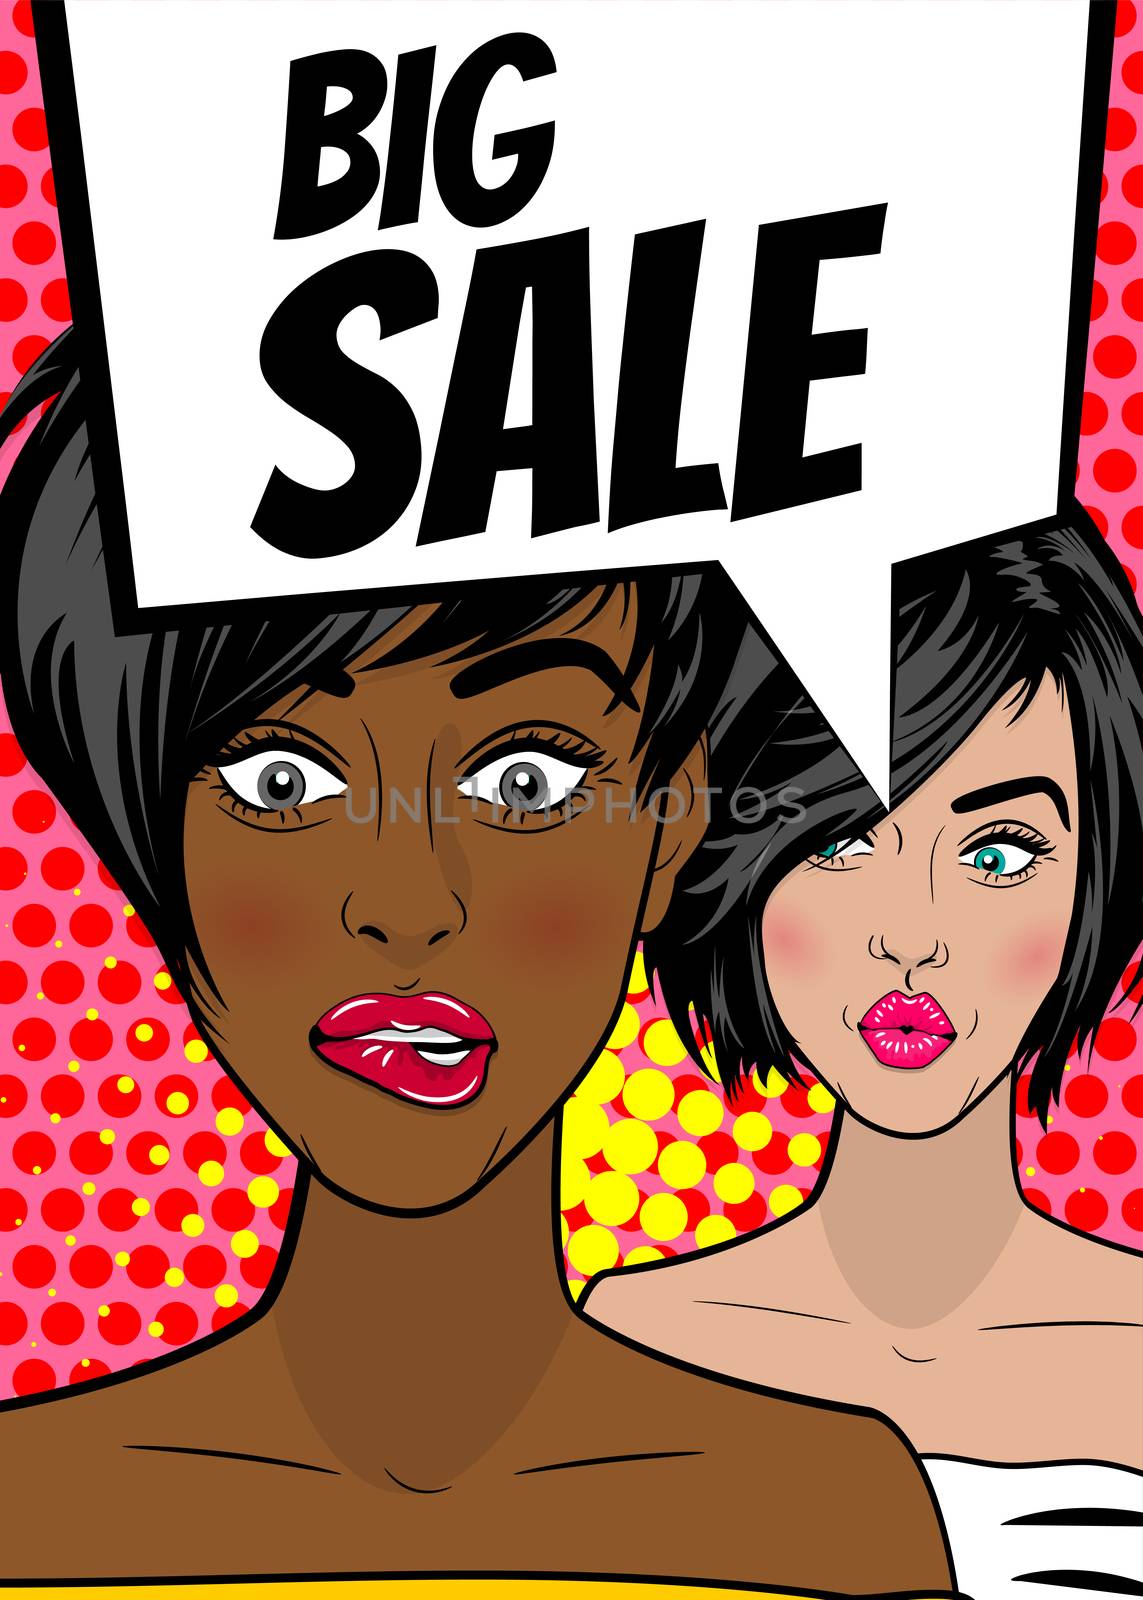 Big sale. Pop art sexy women advertise vintage poster. Comic book text balloon speech bubble. Discount banner vector retro illustration. Girls comic wow face surprised marketing special offer.